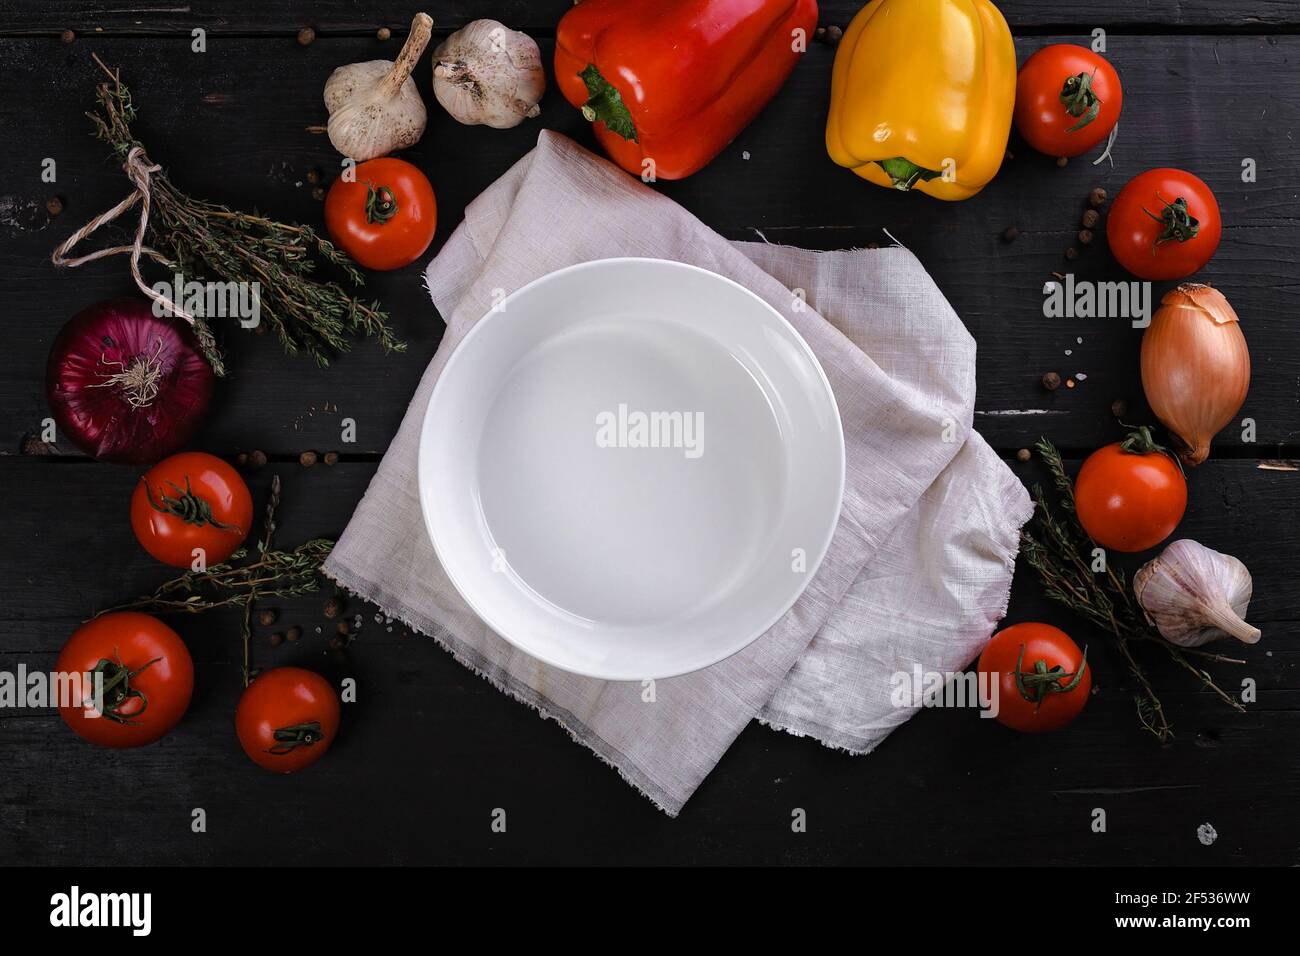 White clean plate on a napkin, bell peppers, tomatoes, garlic and onions are laying on a dark wooden table. Contrast bright colored flatlay. Top view. Stock Photo